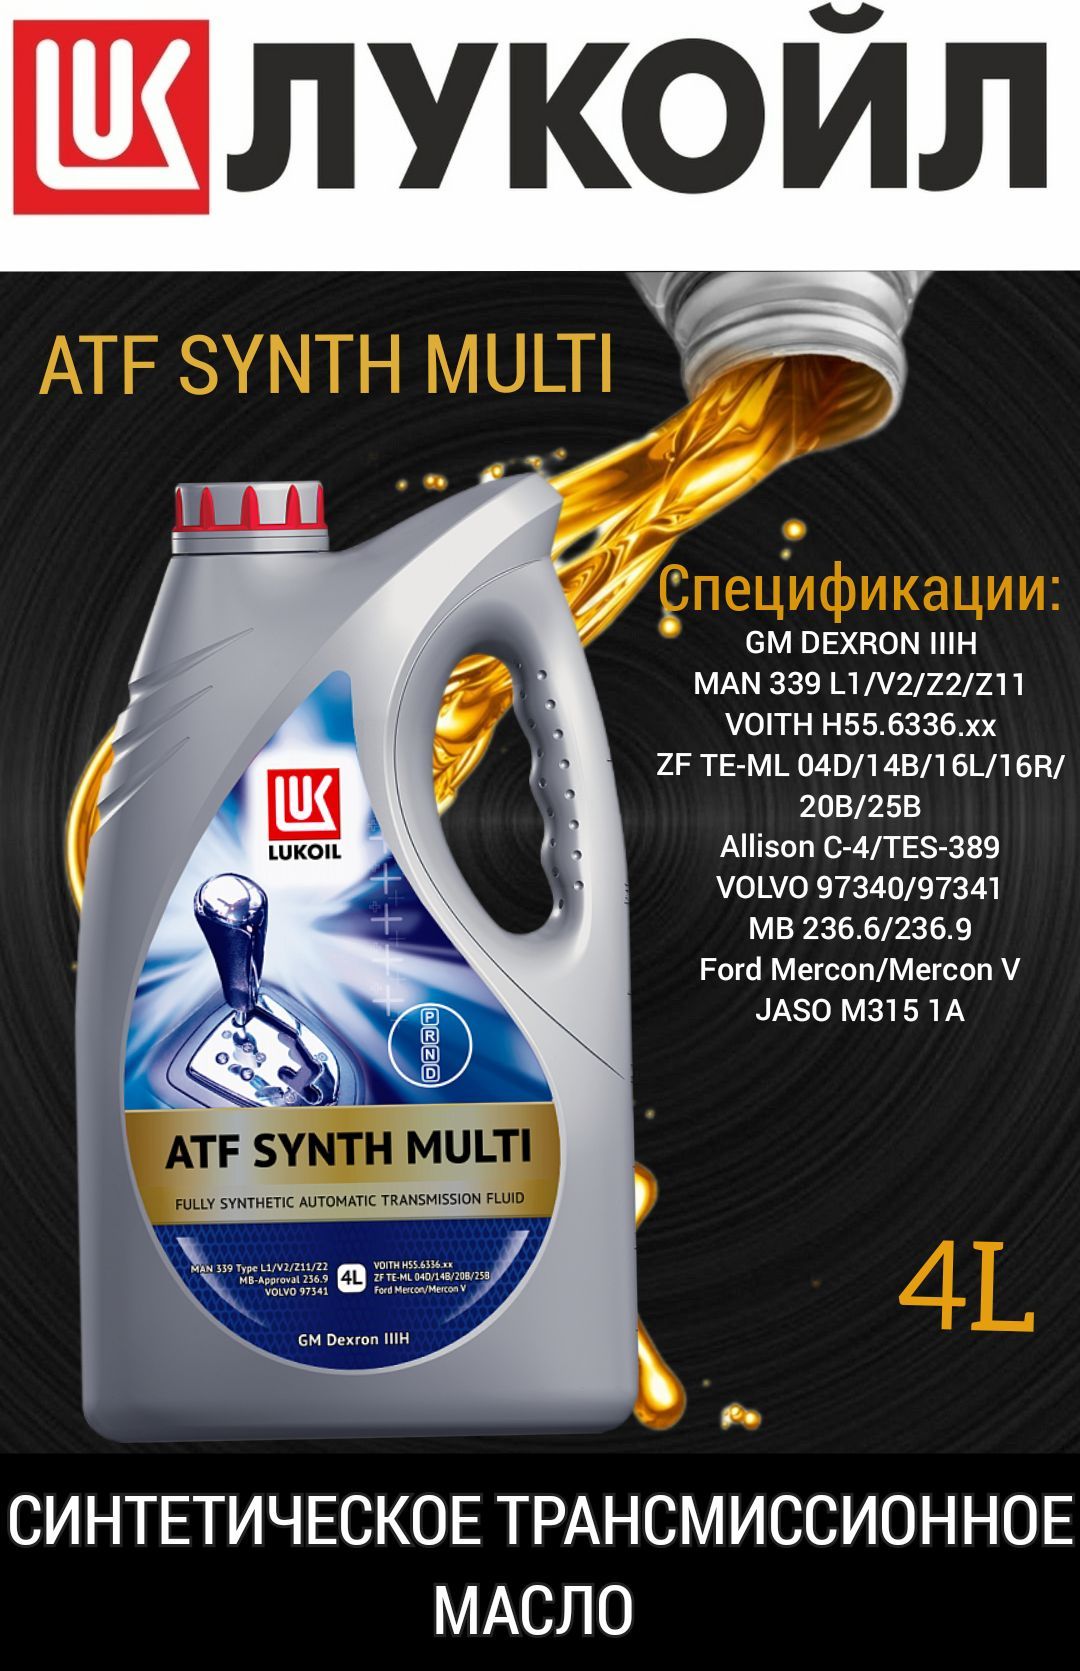 Масло лукойл atf synth. Масло Лукойл ATF Synth Multi. Лукойл ATF Synth vi (20l). Лукойл ATF Synth lv. Lukoil ATF Synth Asia в Вольво.